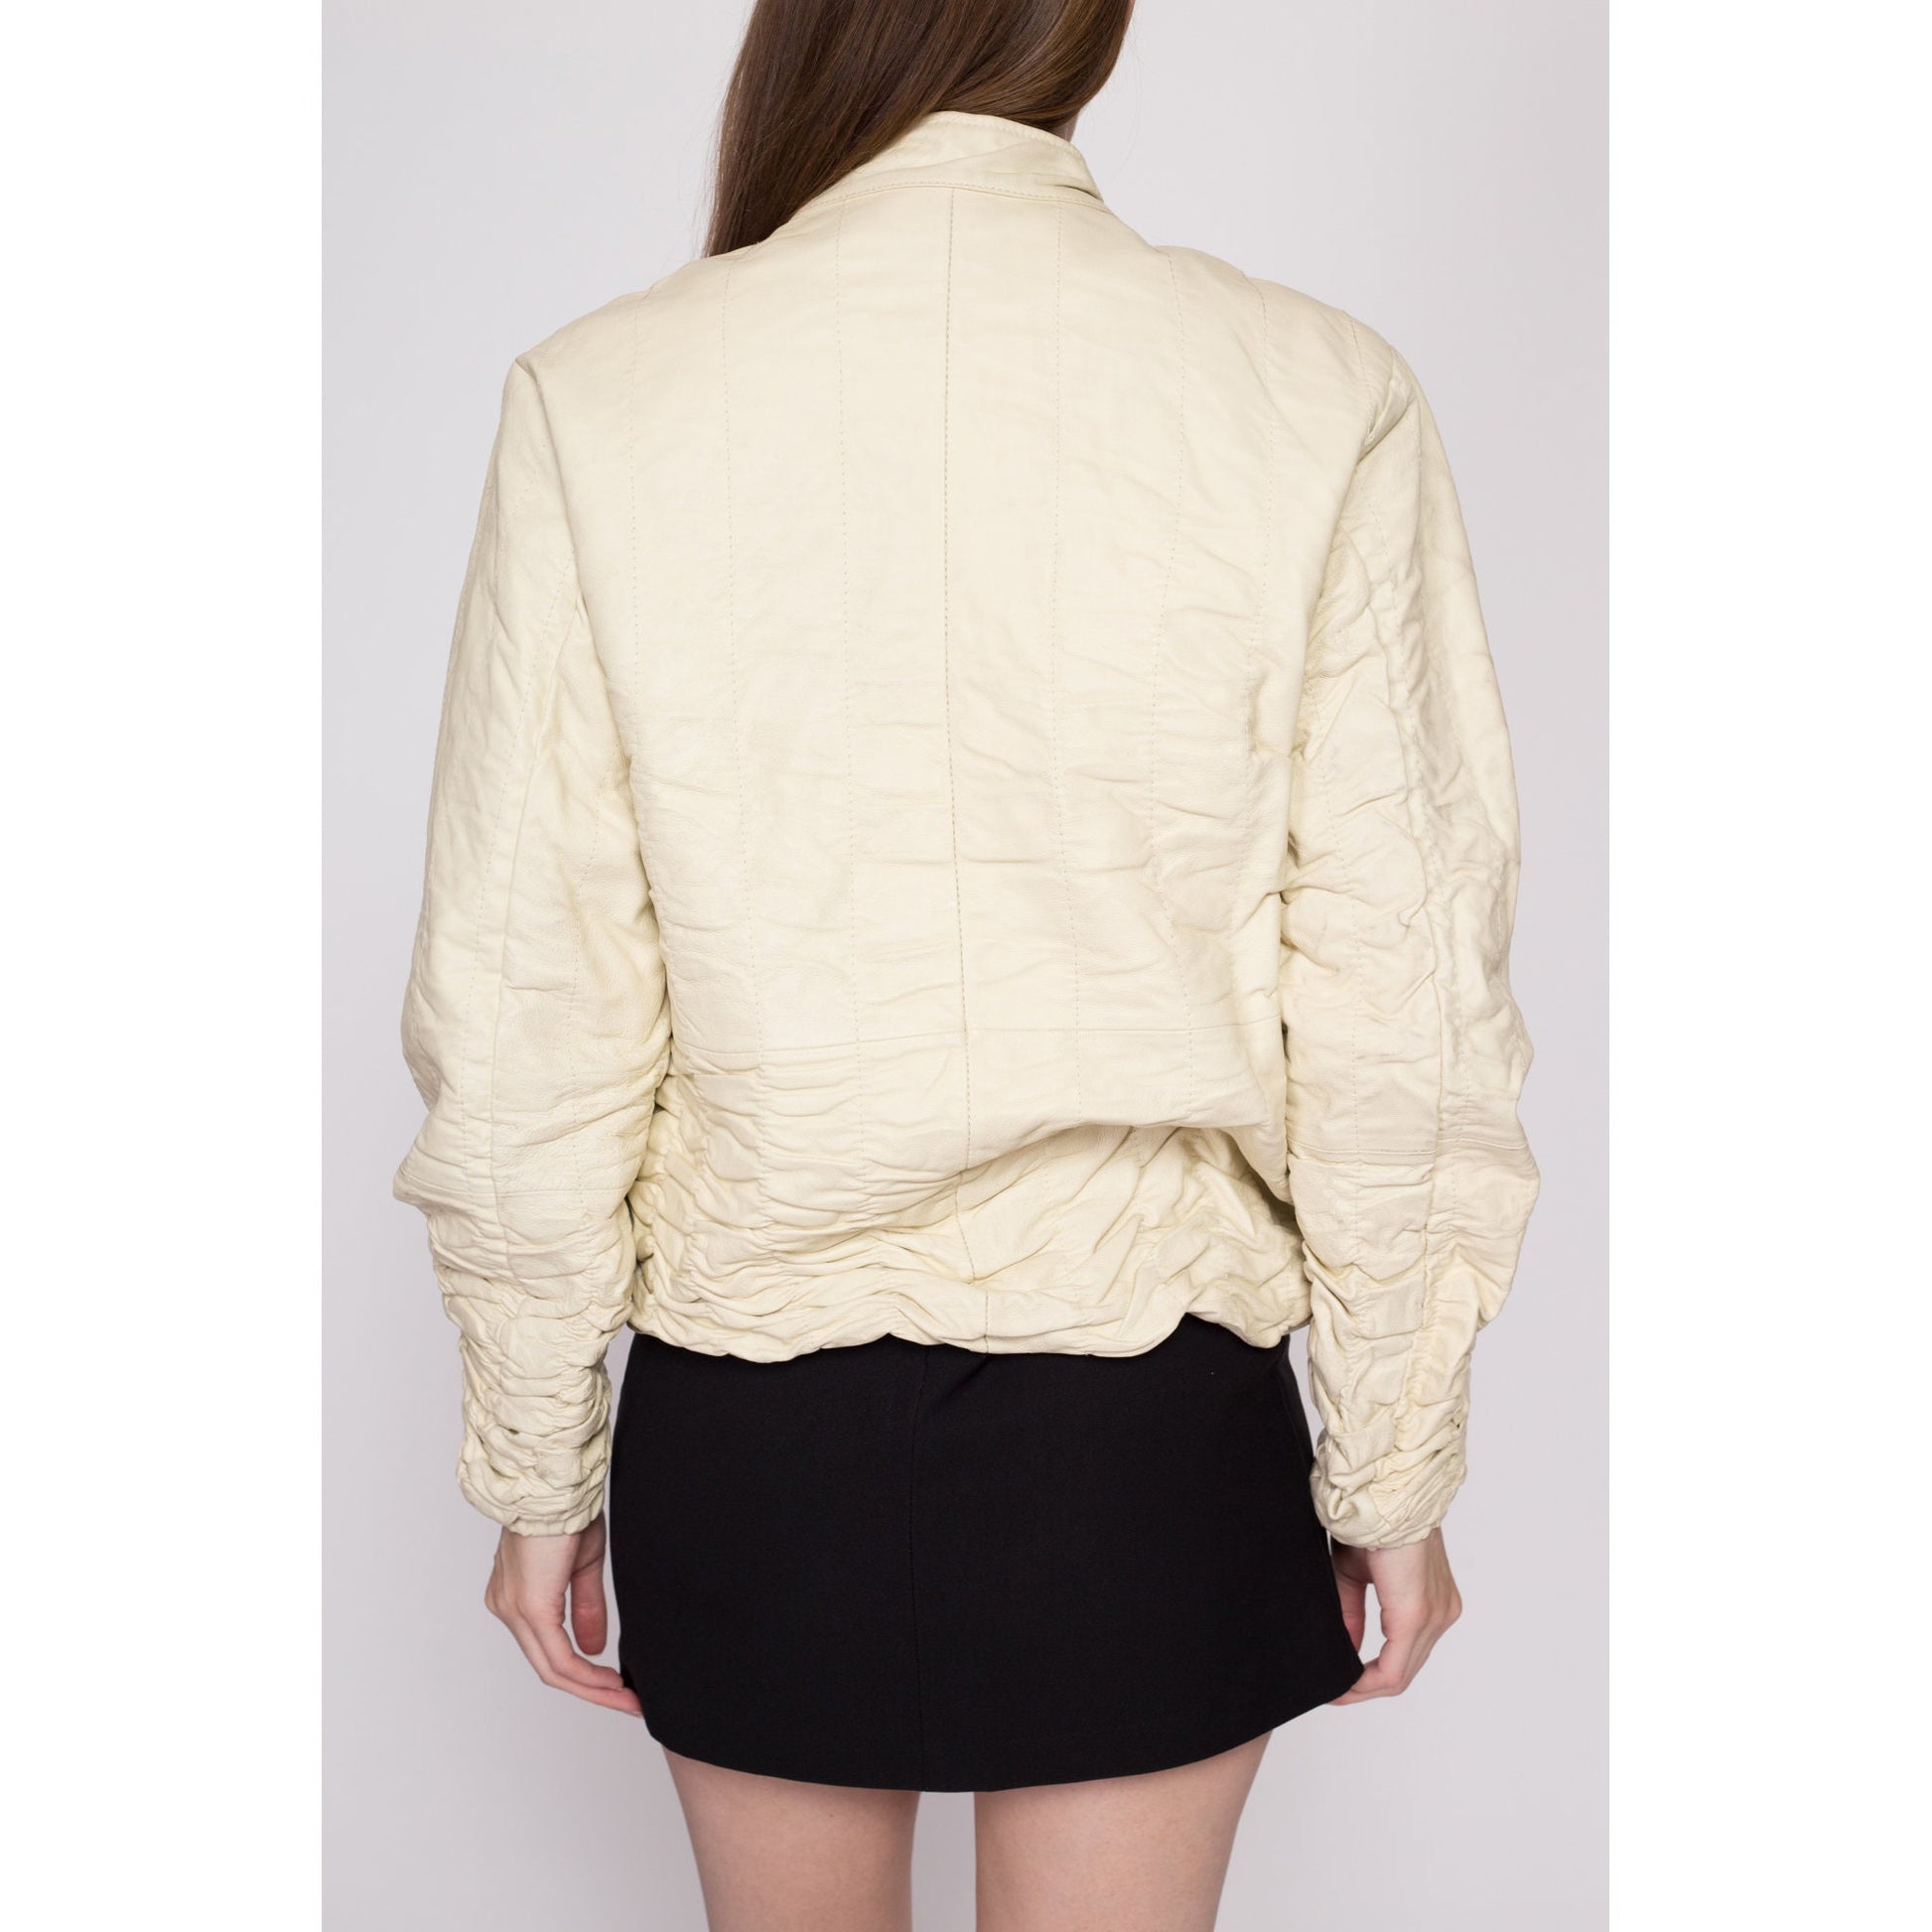 L| 90s Ruched Cream Leather Jacket - Large | Vintage Zip Up Textured Cropped Bubble Coat